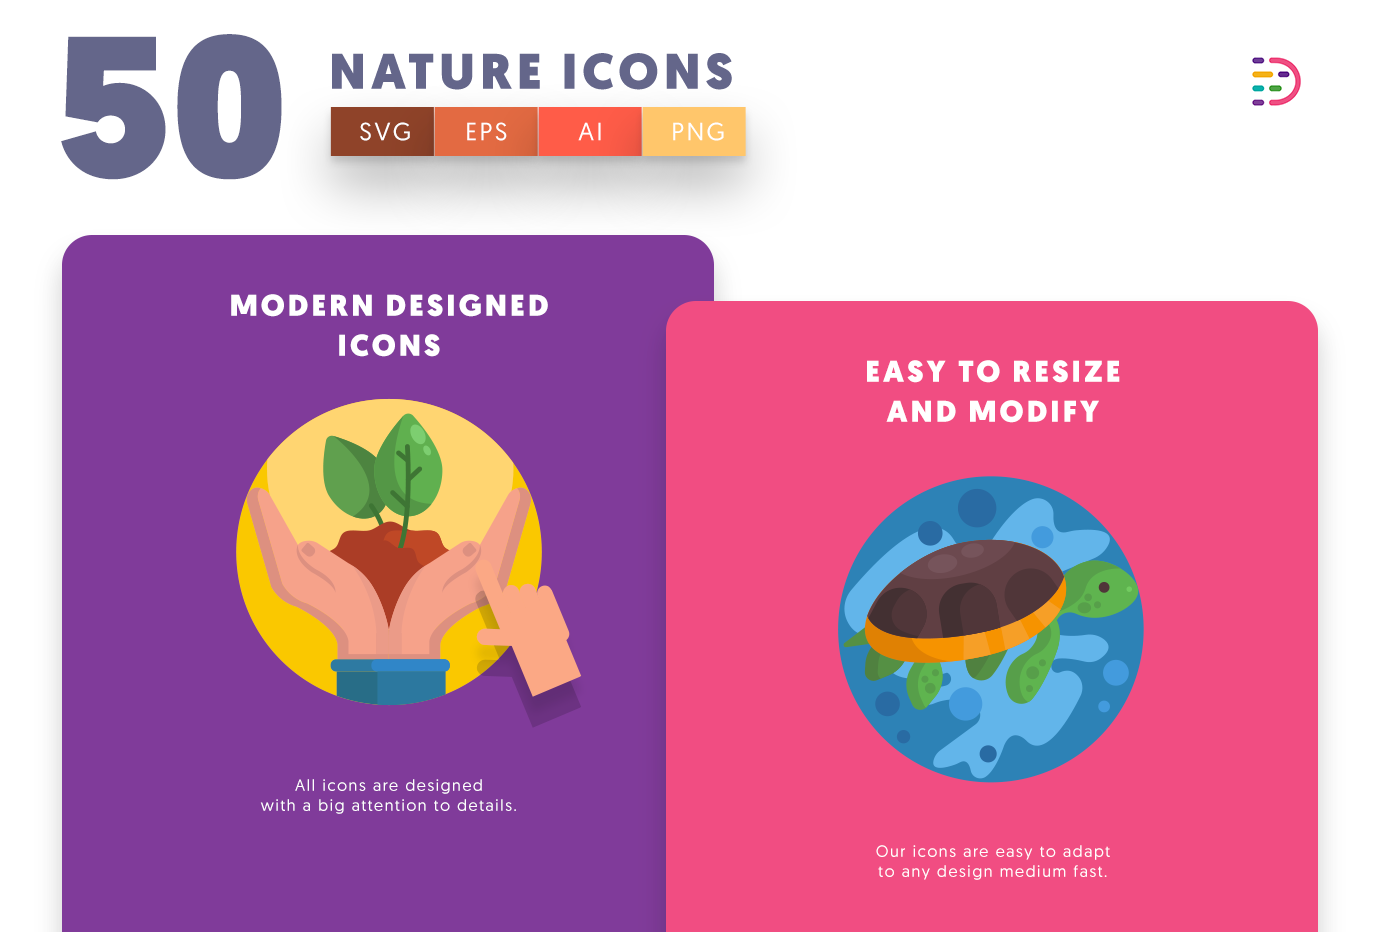 Design ready 50 Nature Icons